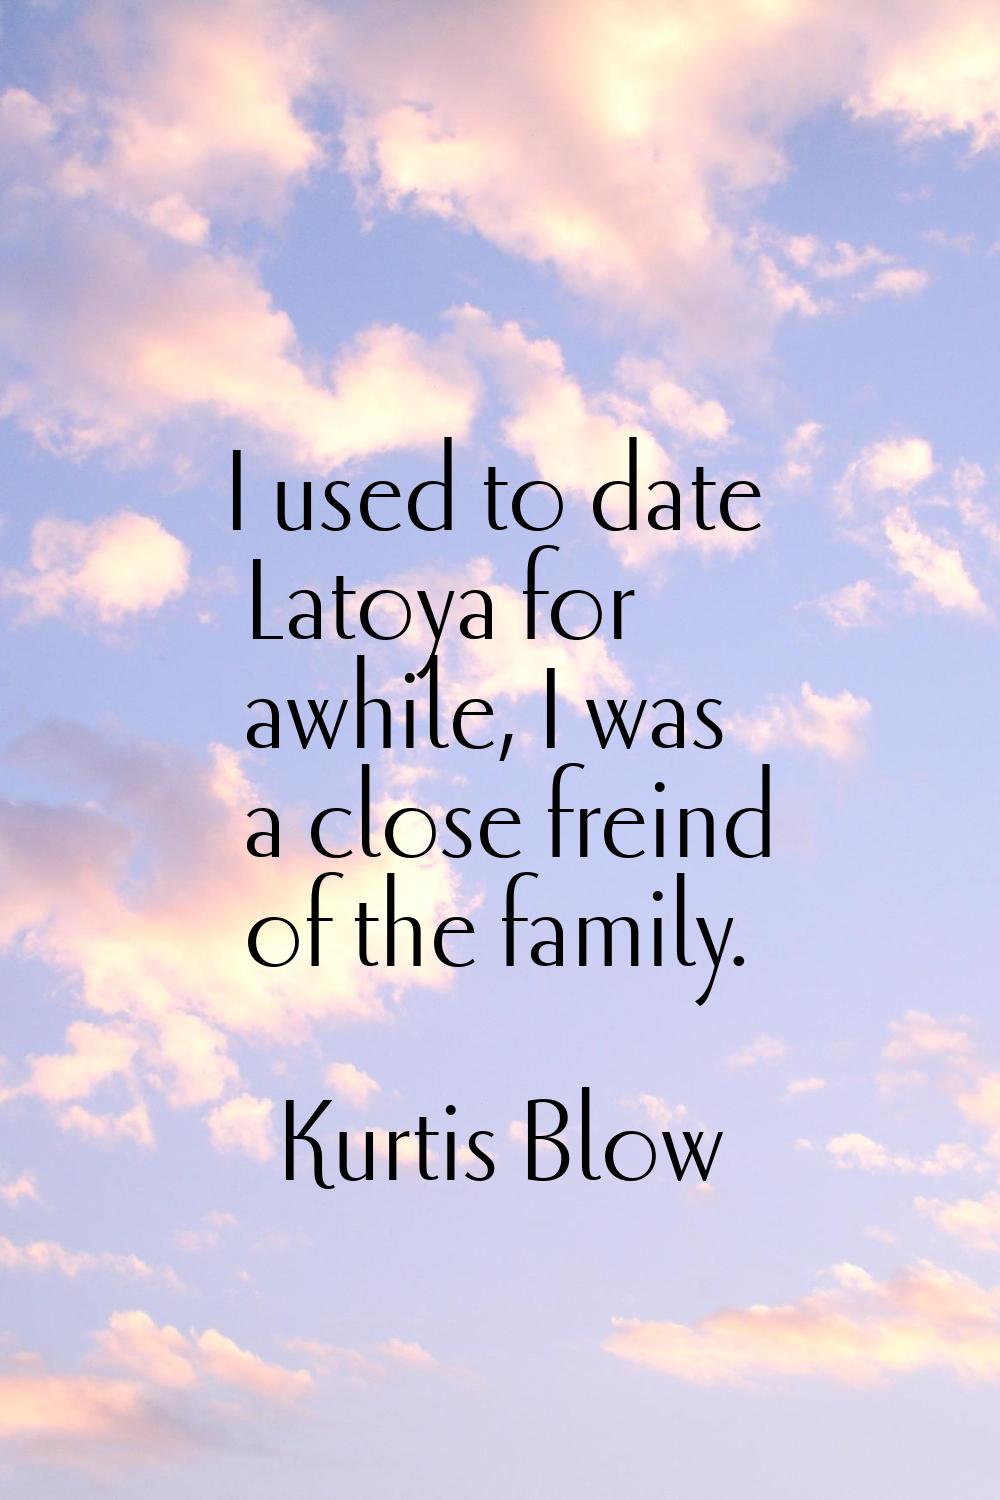 I used to date Latoya for awhile, I was a close freind of the family.